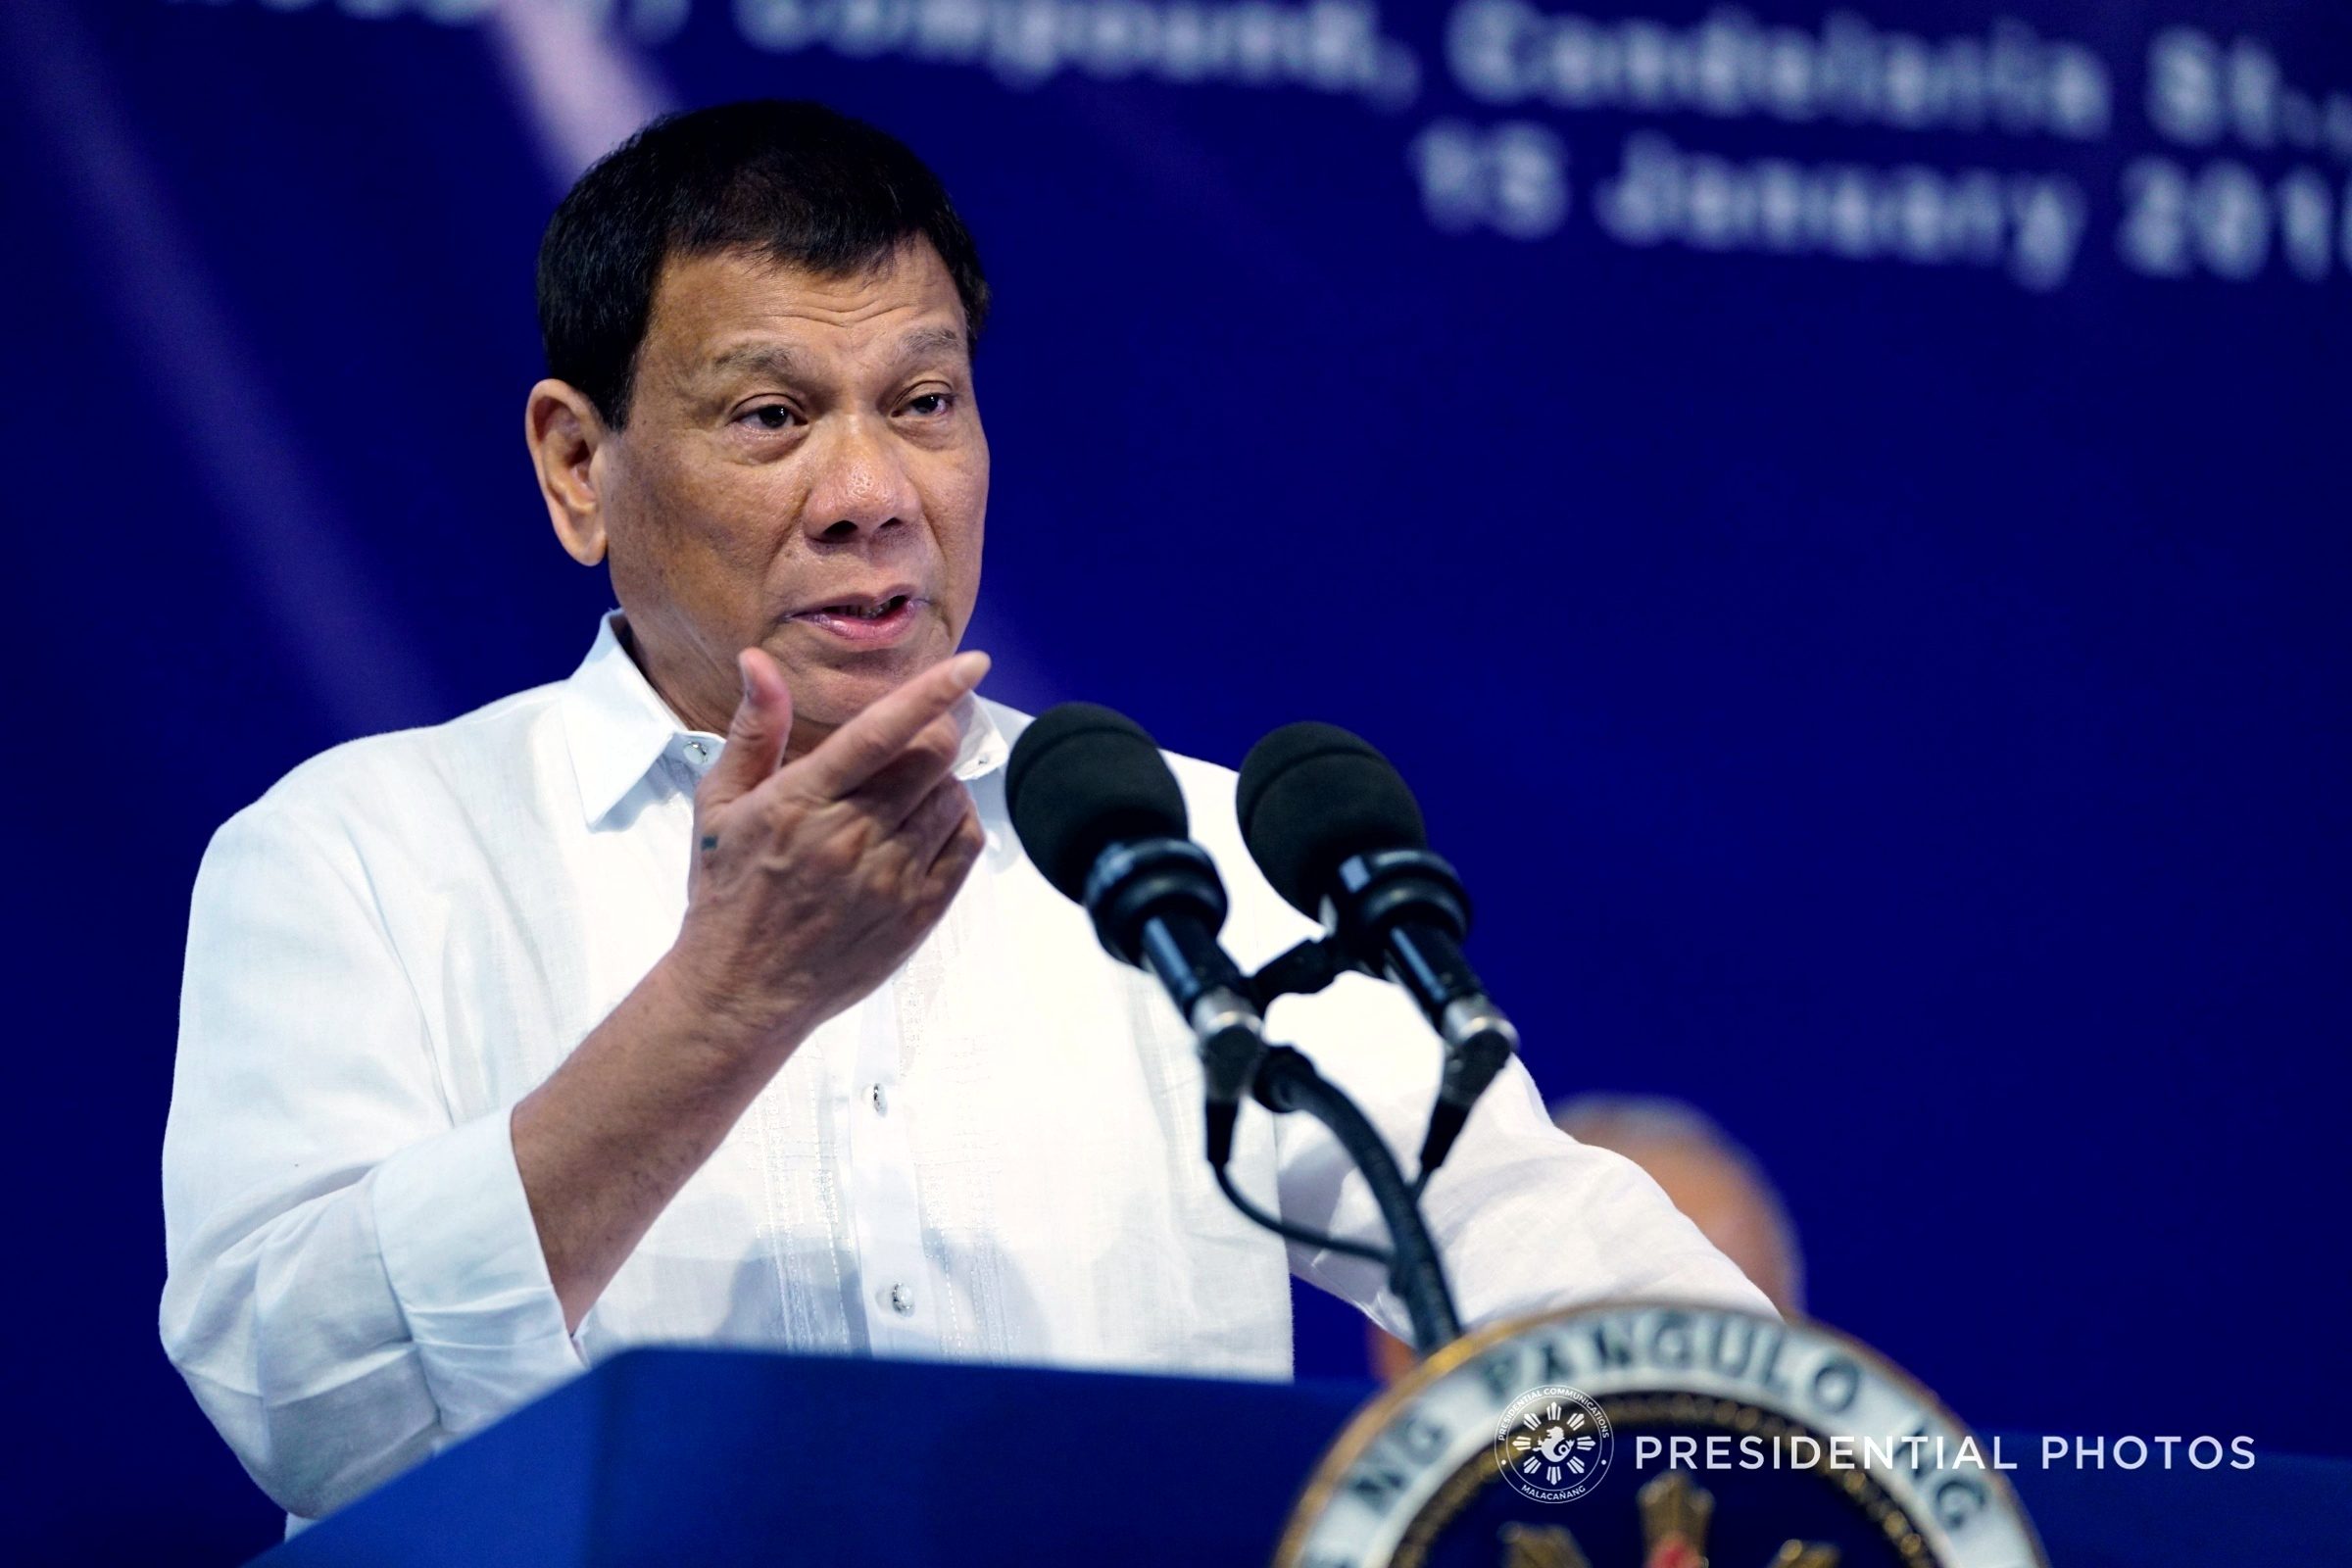 Malacañang on Carandang: ‘There is only one President’